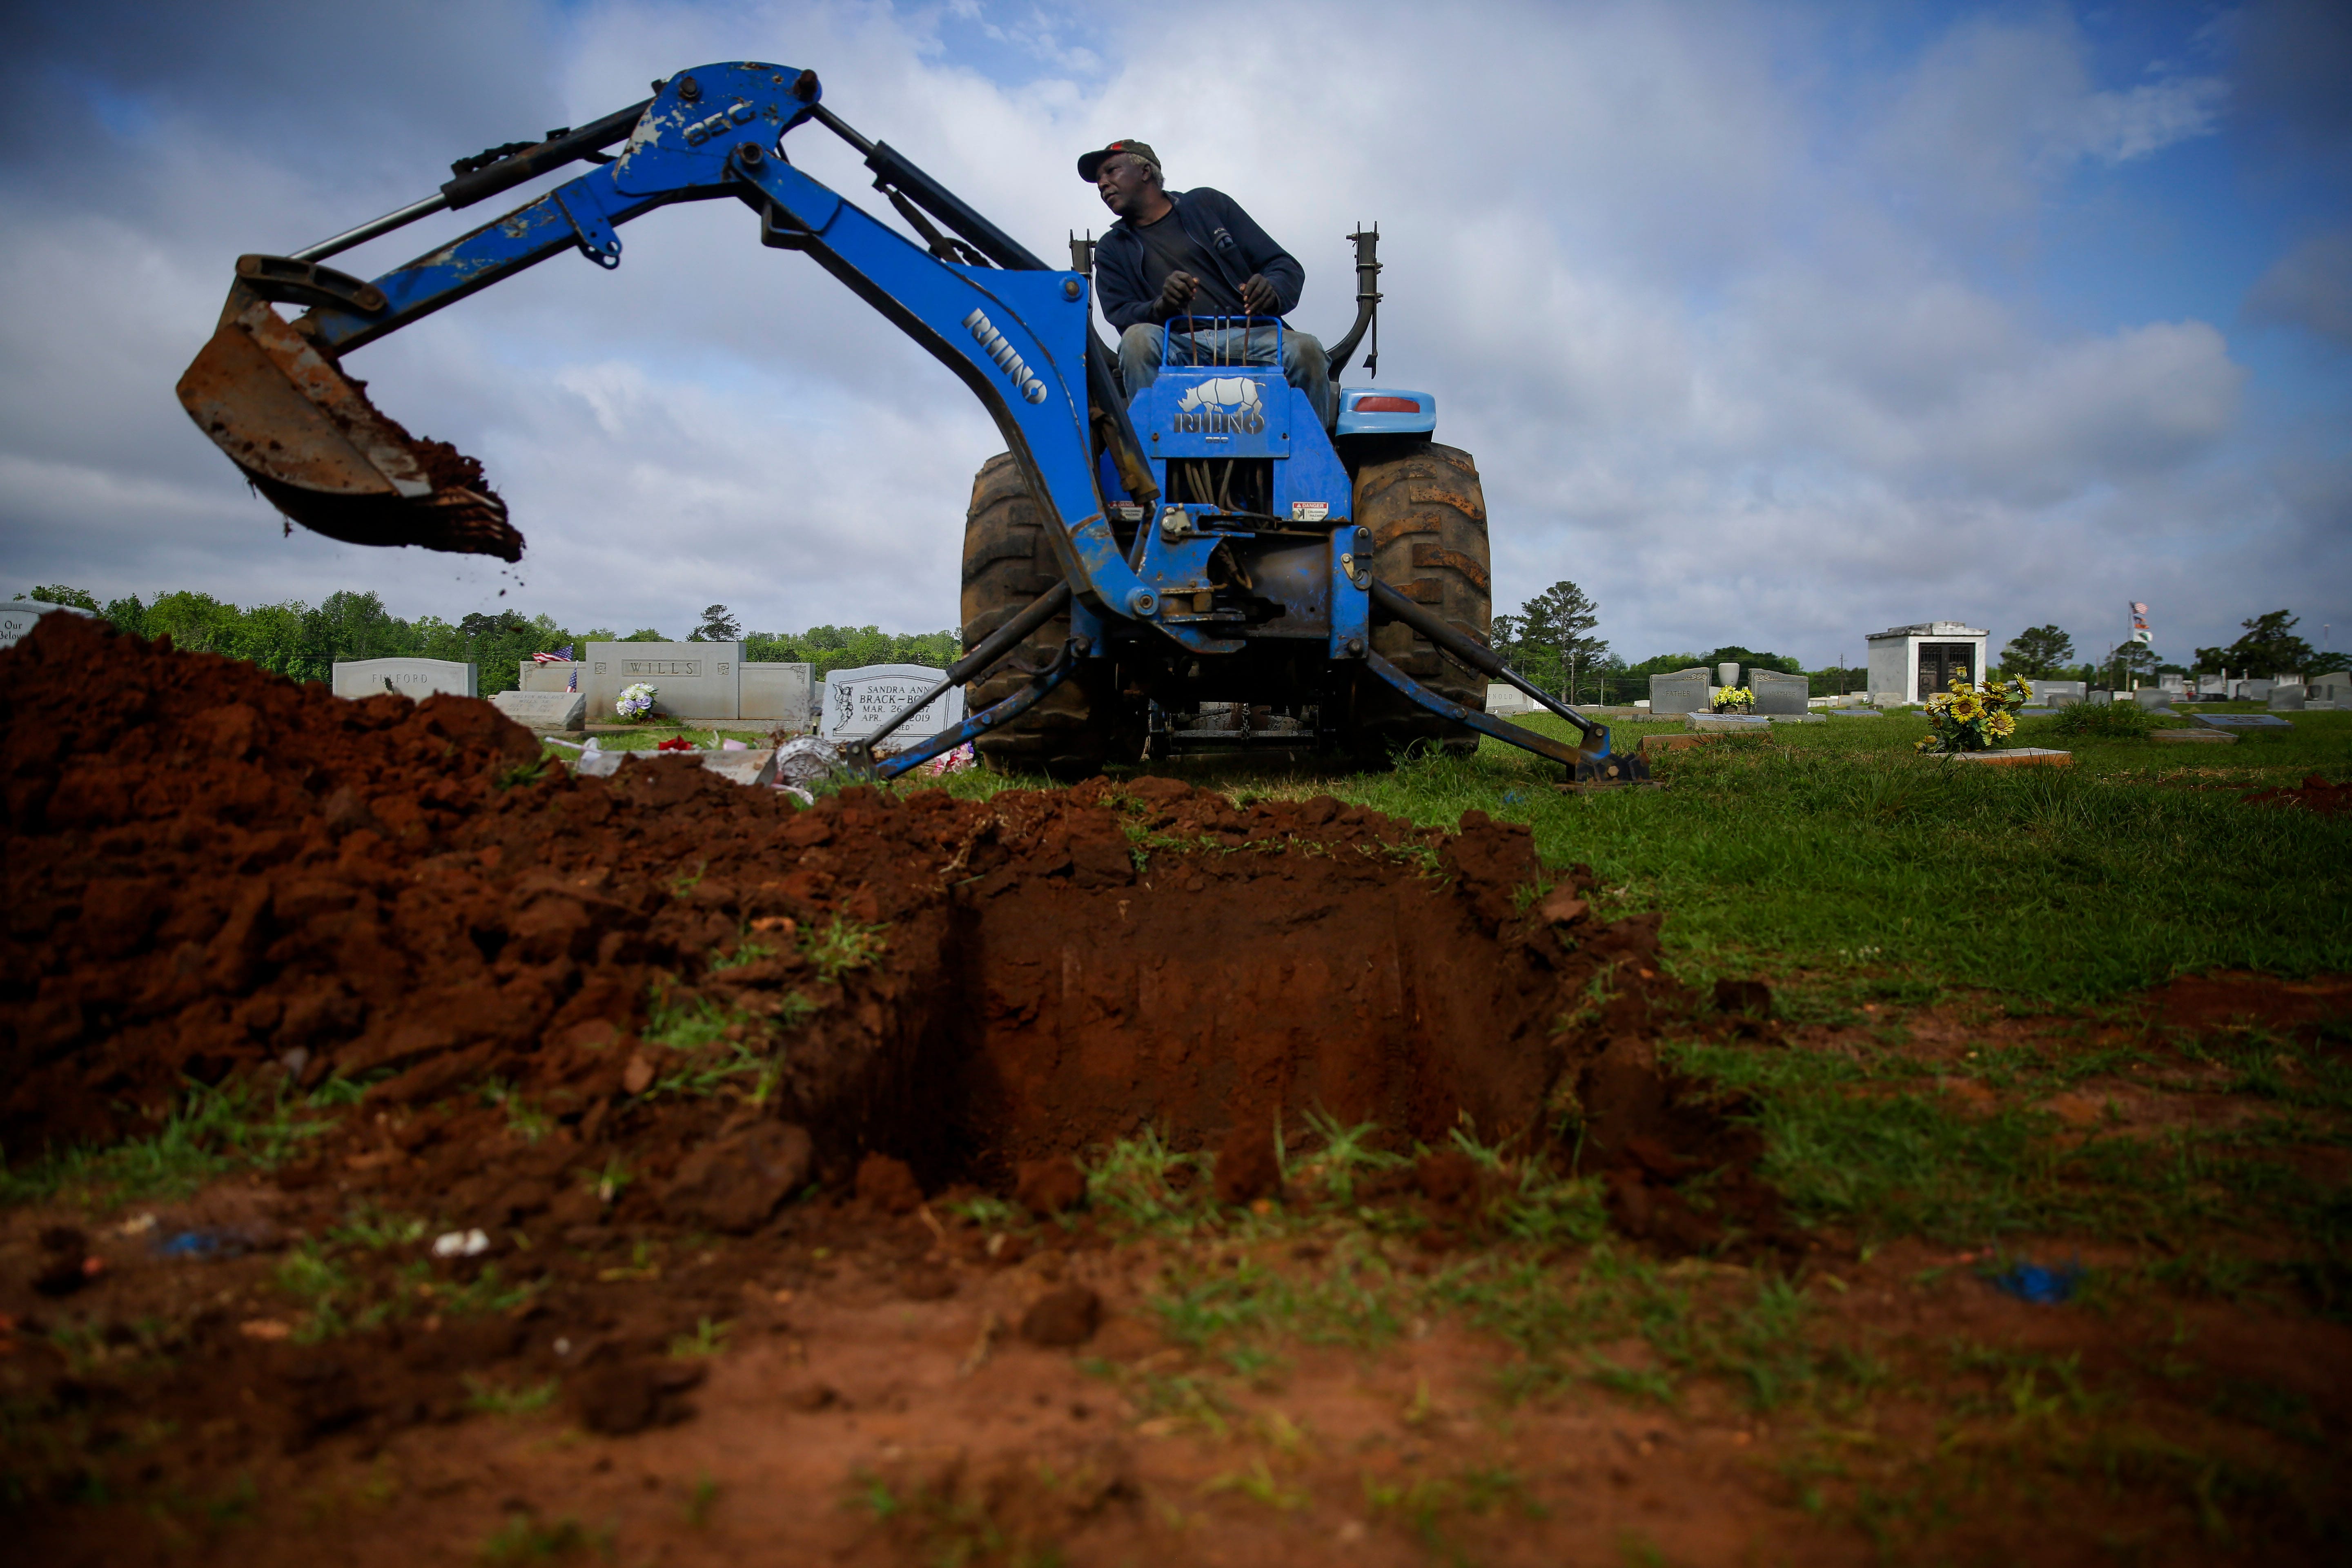 Horace Bell, 60, of Americus, Ga., uses an excavator to dig a grave at Cedar Hill Cemetery on Saturday, April 18, 2020, in Dawson, Ga.